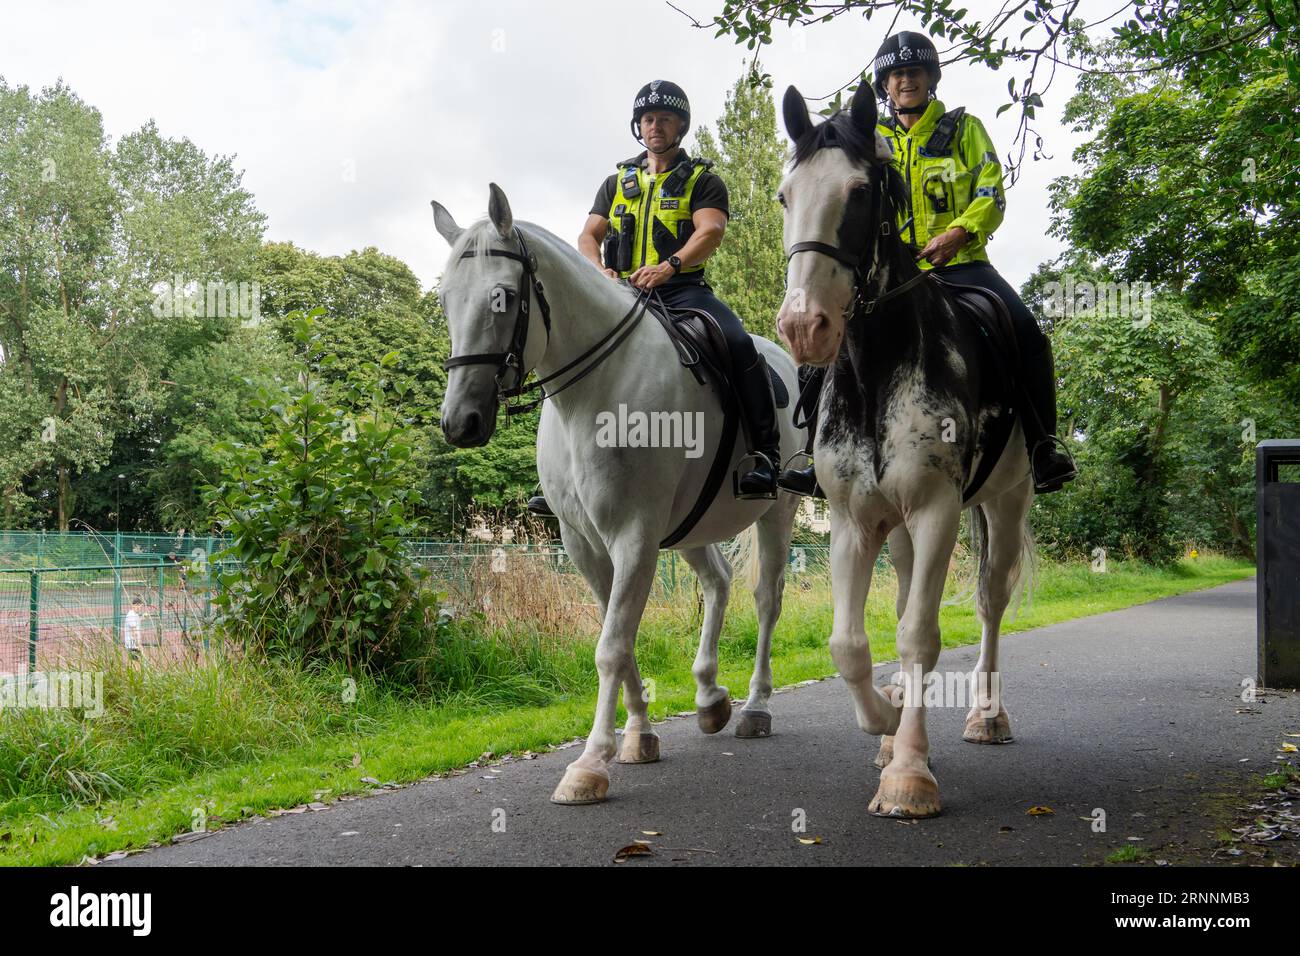 Two UK police officers on horseback in a public park. Concept of mounted police, policing, patrolling, bobbies on the beat, service animals Stock Photo